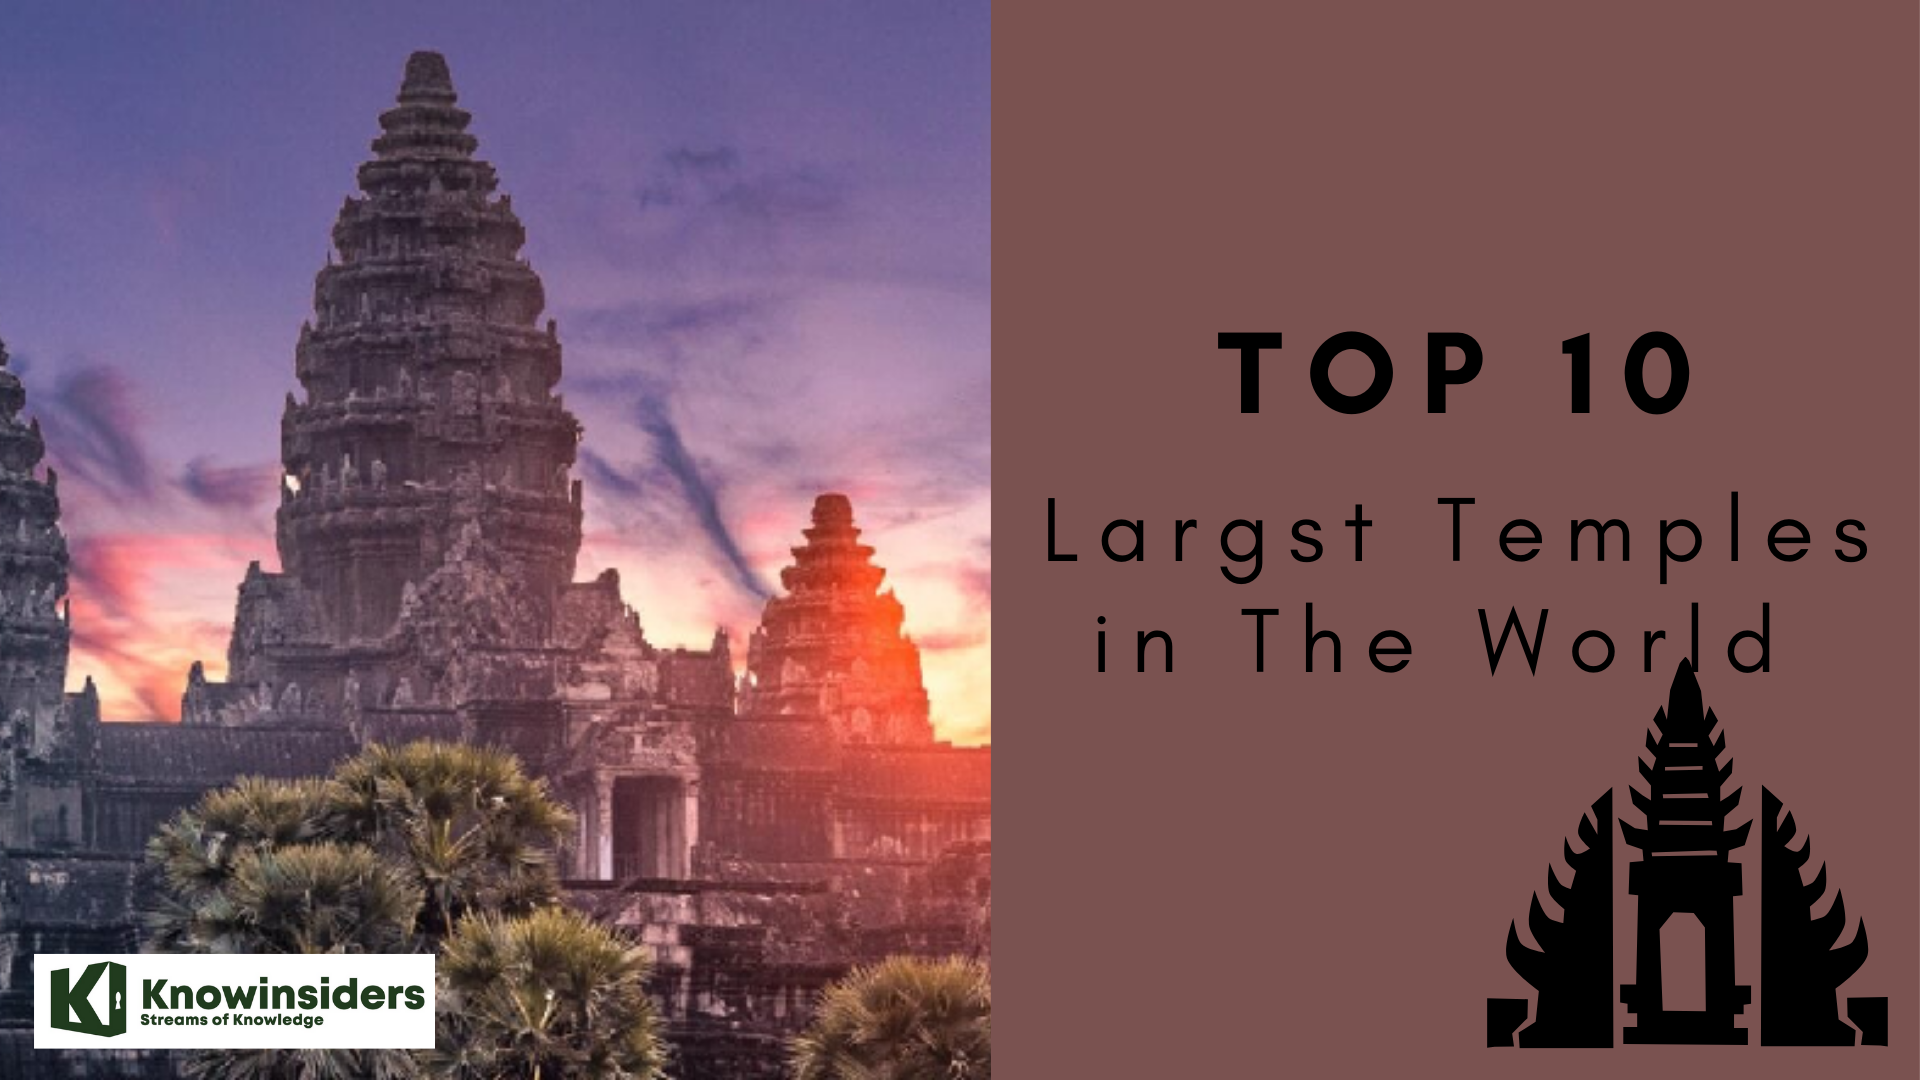 Top 10 largest temples in the world 